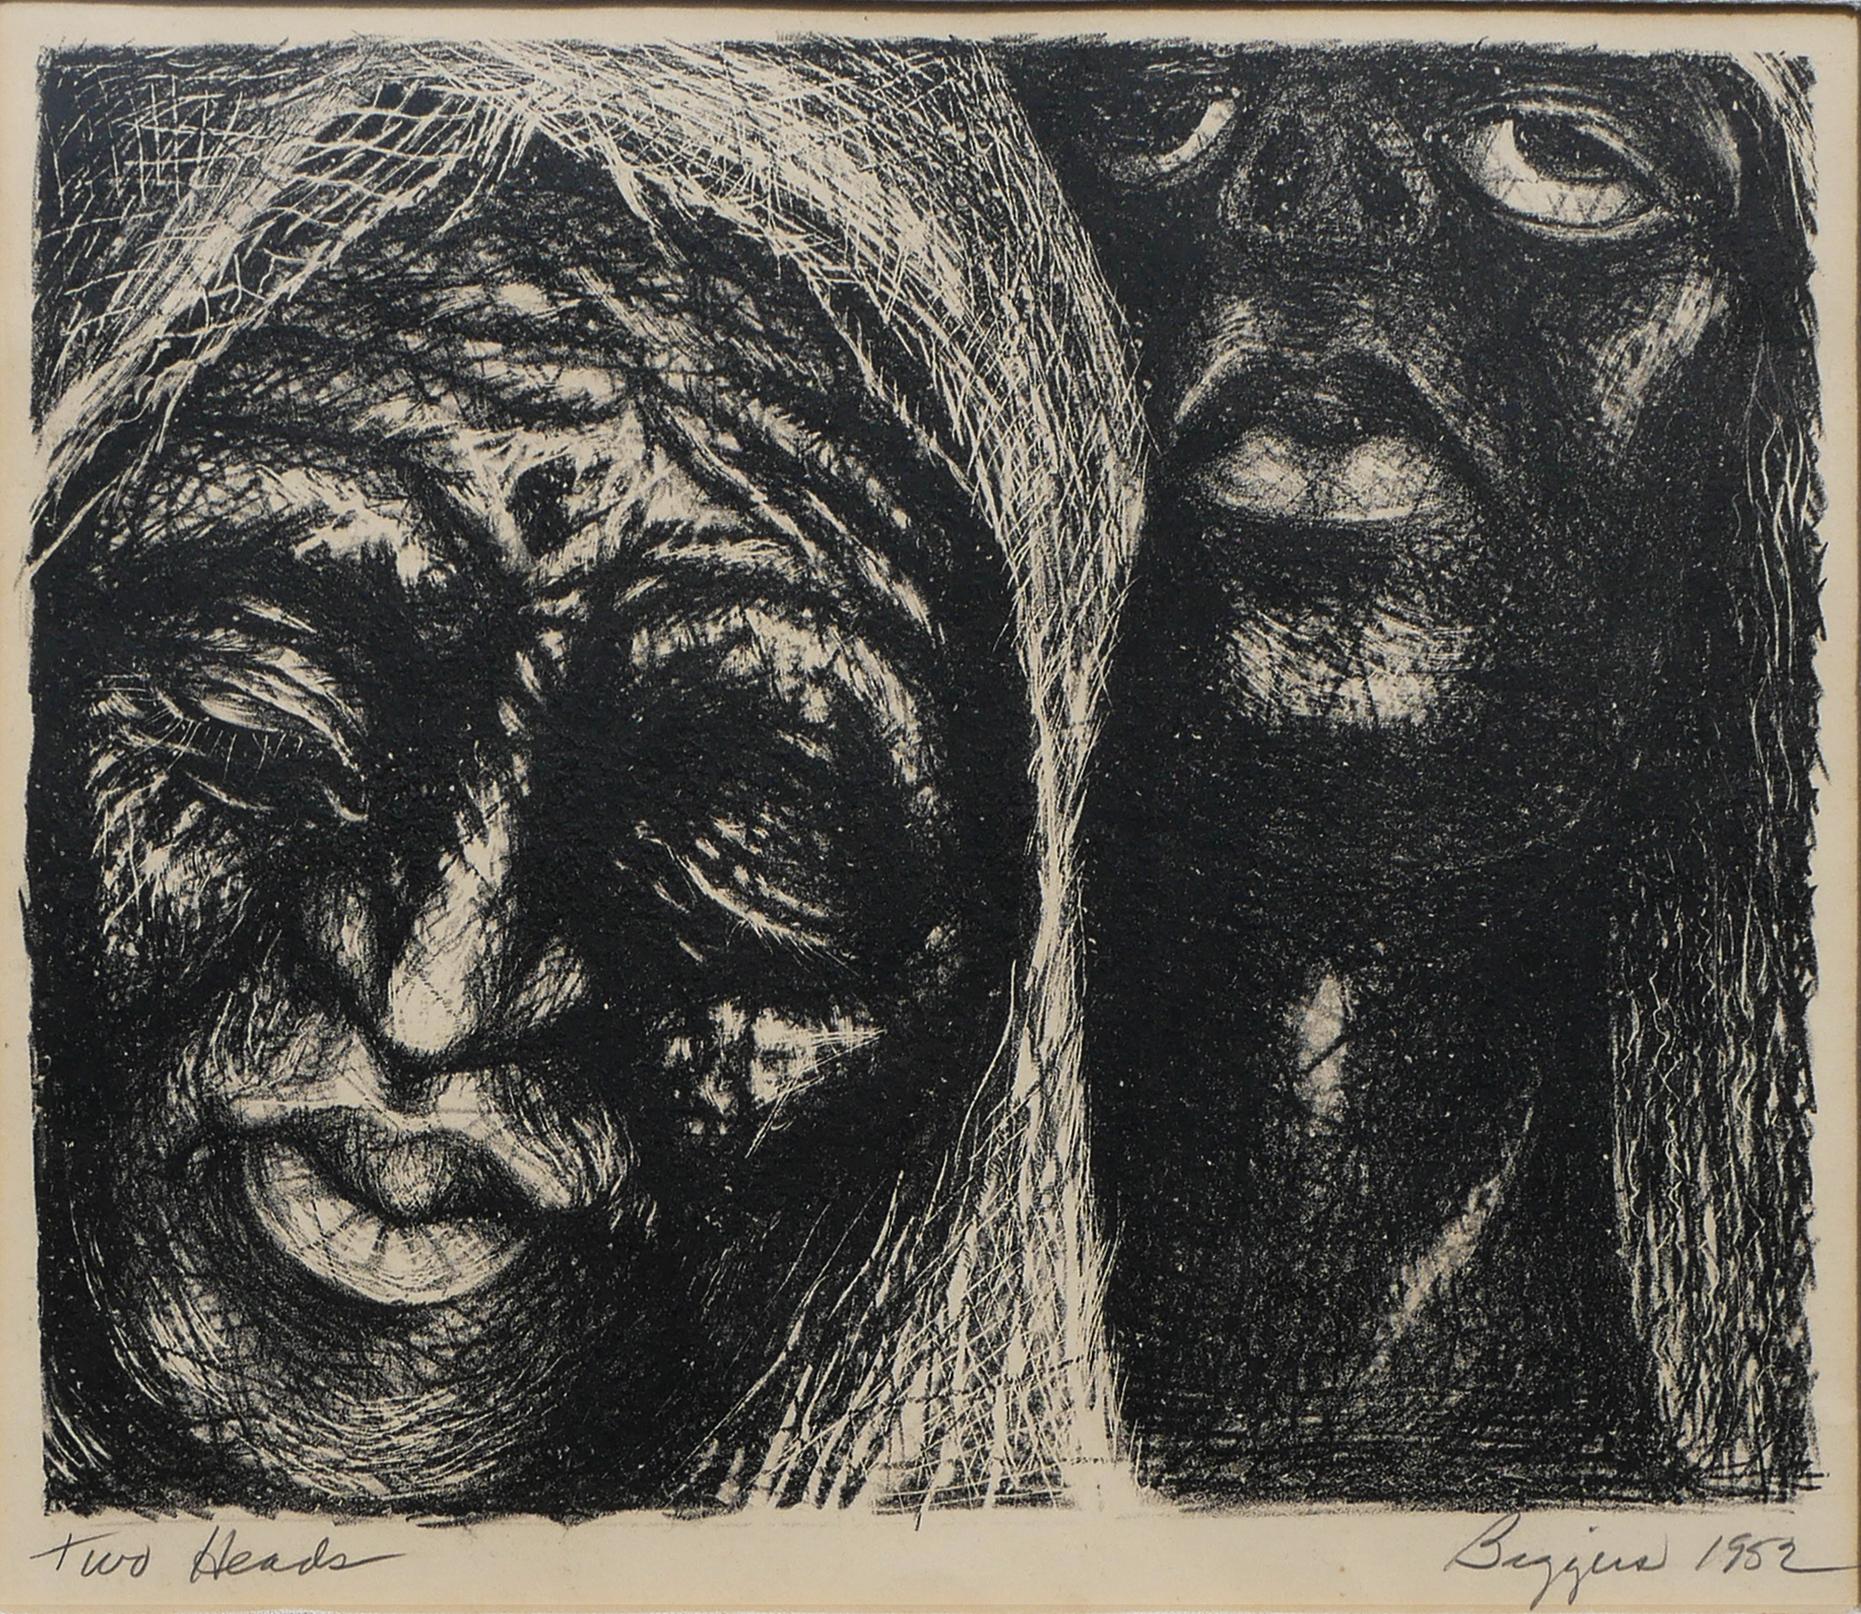 “Two Heads” Modern Abstract Black and White Woodcut Print of Two Figures 1